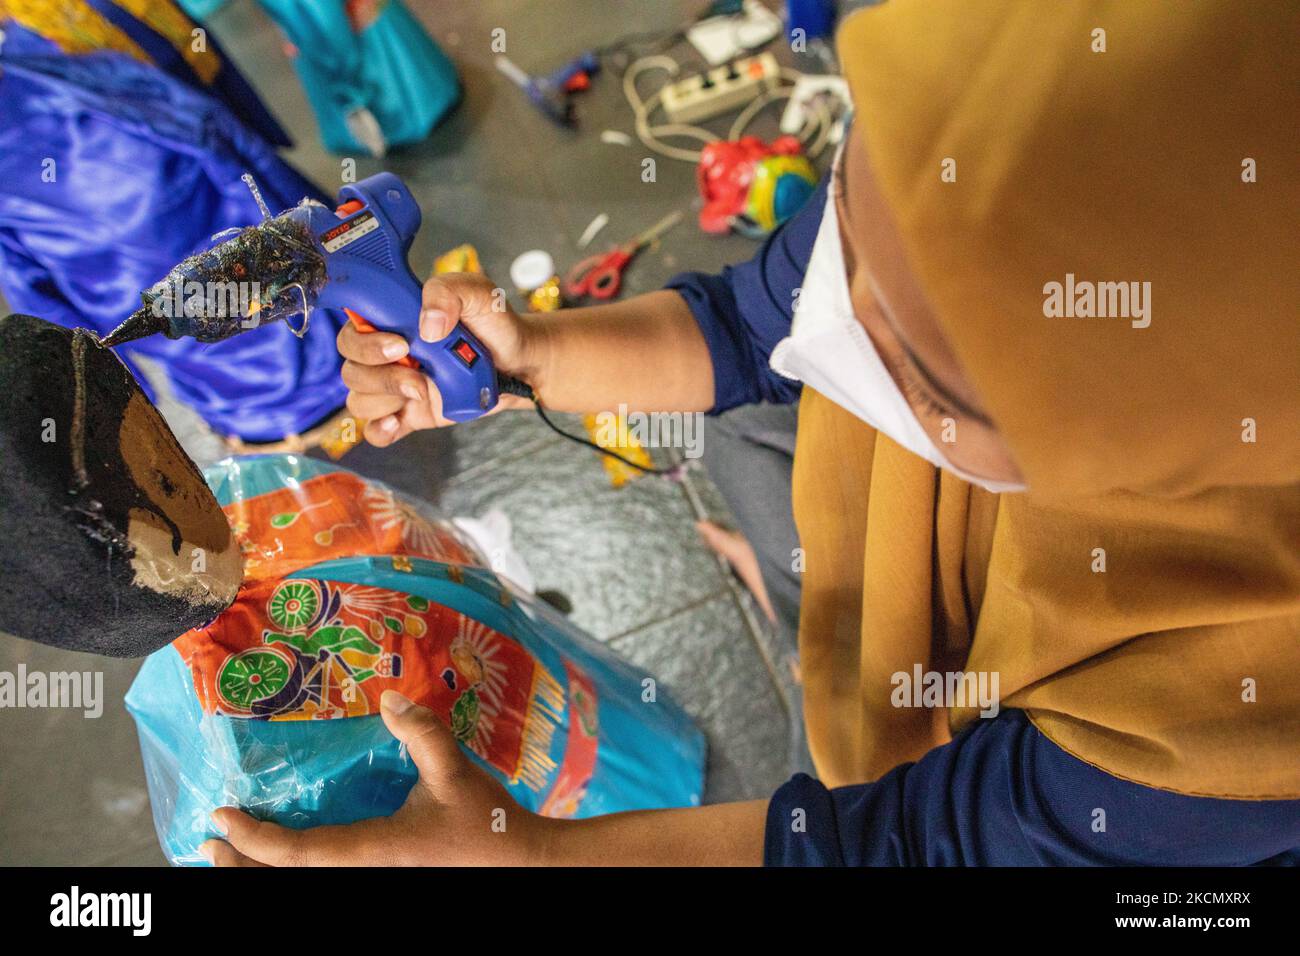 Manufacture and sale of Ondel-Ondel, a traditional Betawi-Jakarta doll toy. After the decline in COVID-19 cases in Jakarta, the tourism sector began to revive, one of which is the ondel-ondel producer and seller in Jagakarsa, sales increased by 20%. (Photo by Donal Husni/NurPhoto) Stock Photo